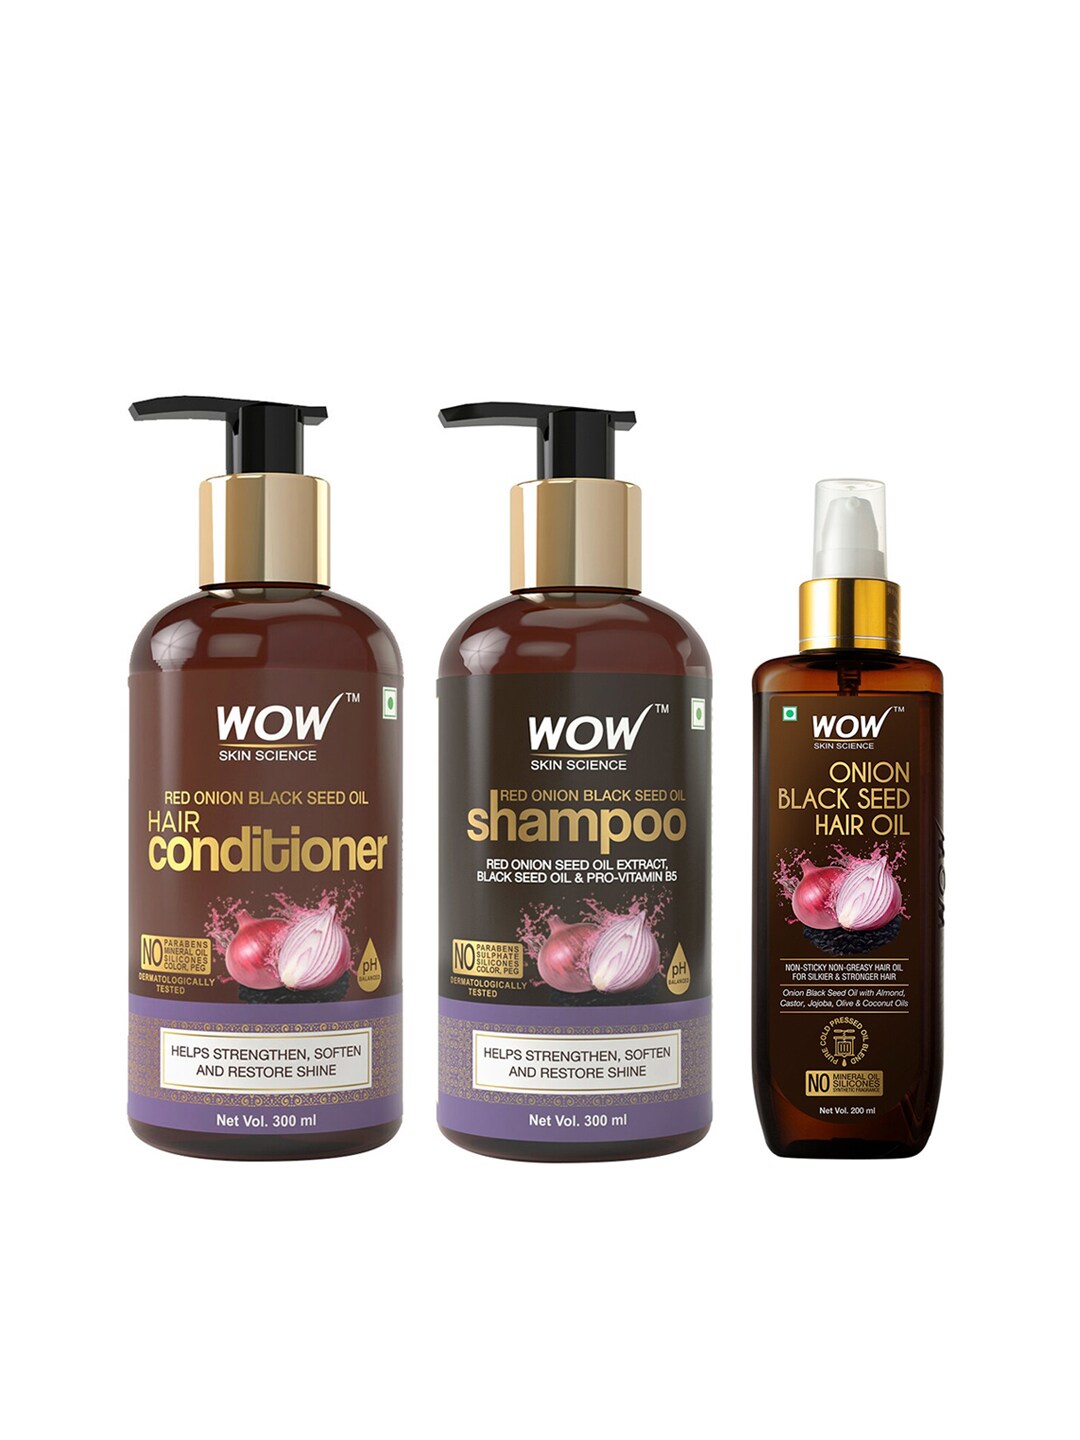 WOW SKIN SCIENCE Set of Hair Oil- Shampoo & Conditioner Price in India